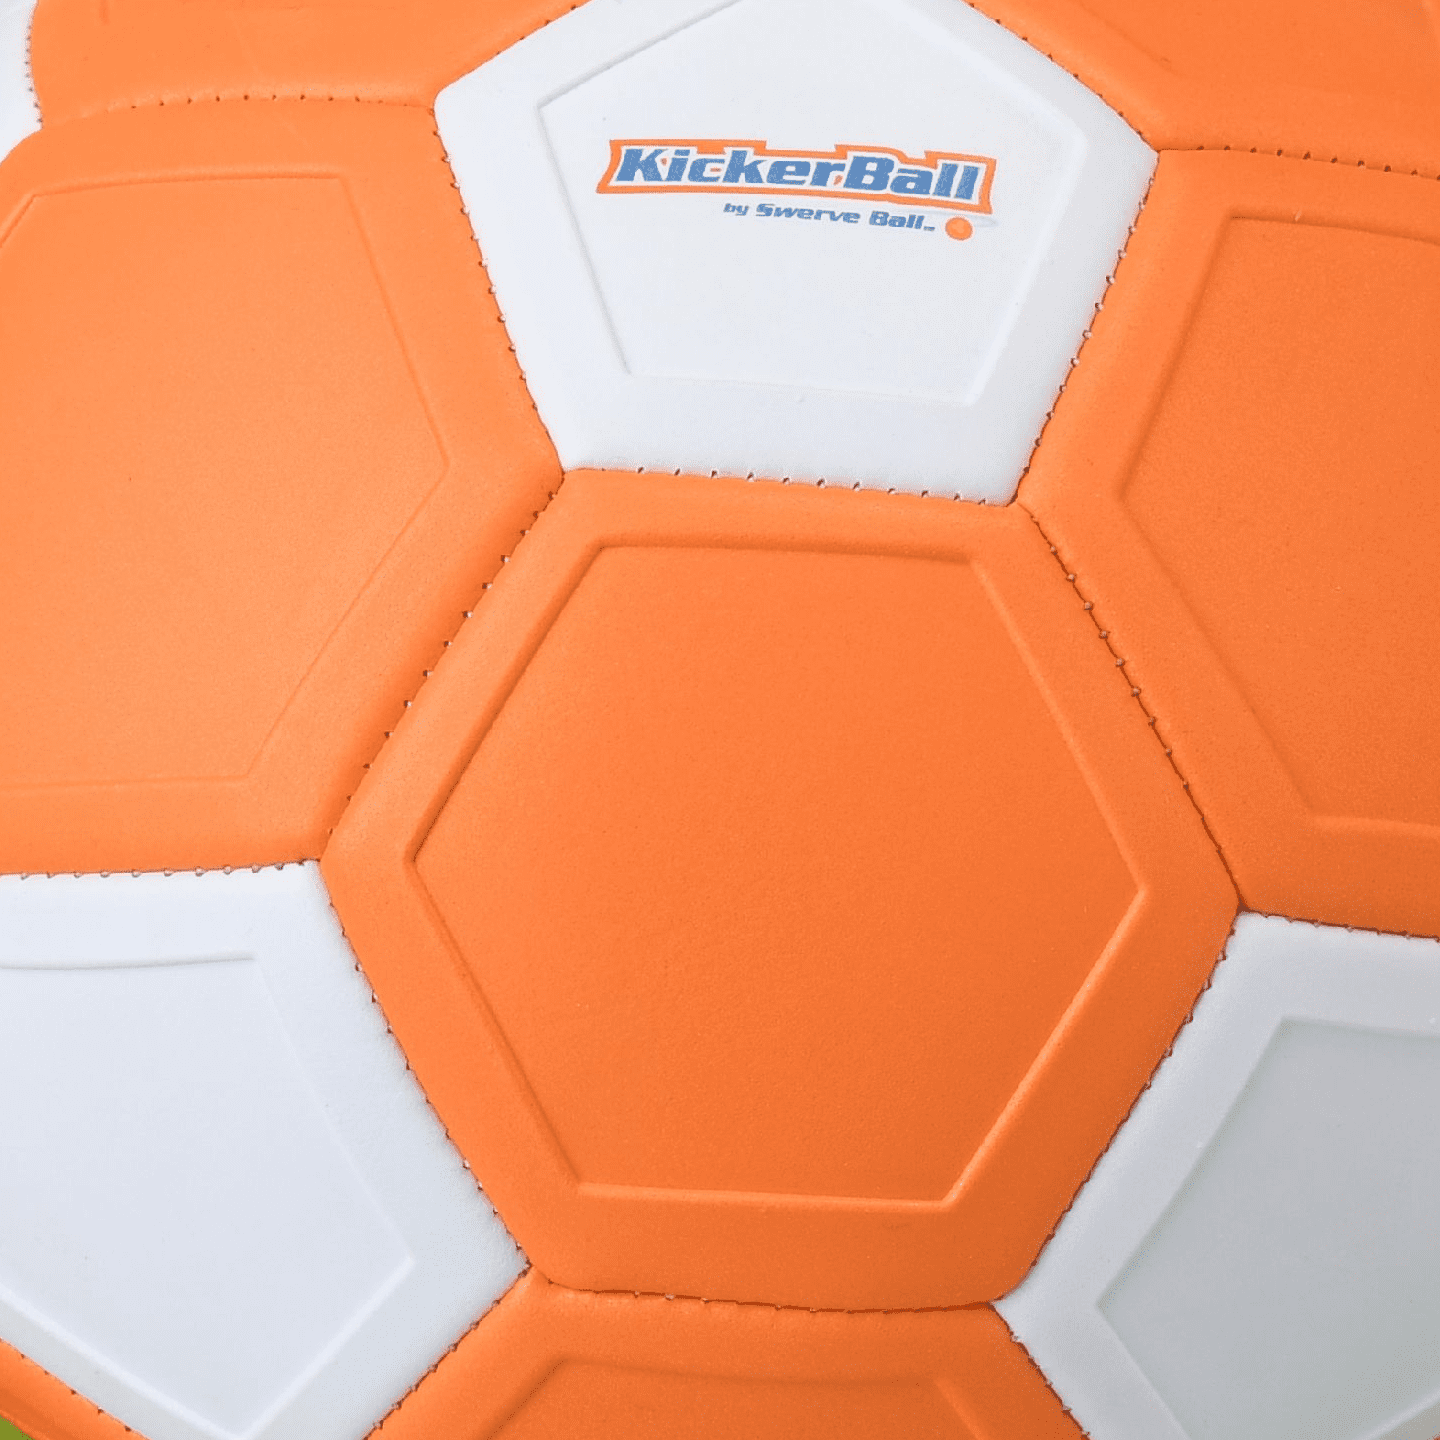 Kickerball® Curve and Swerve Soccer Ball, 1 ct - Harris Teeter